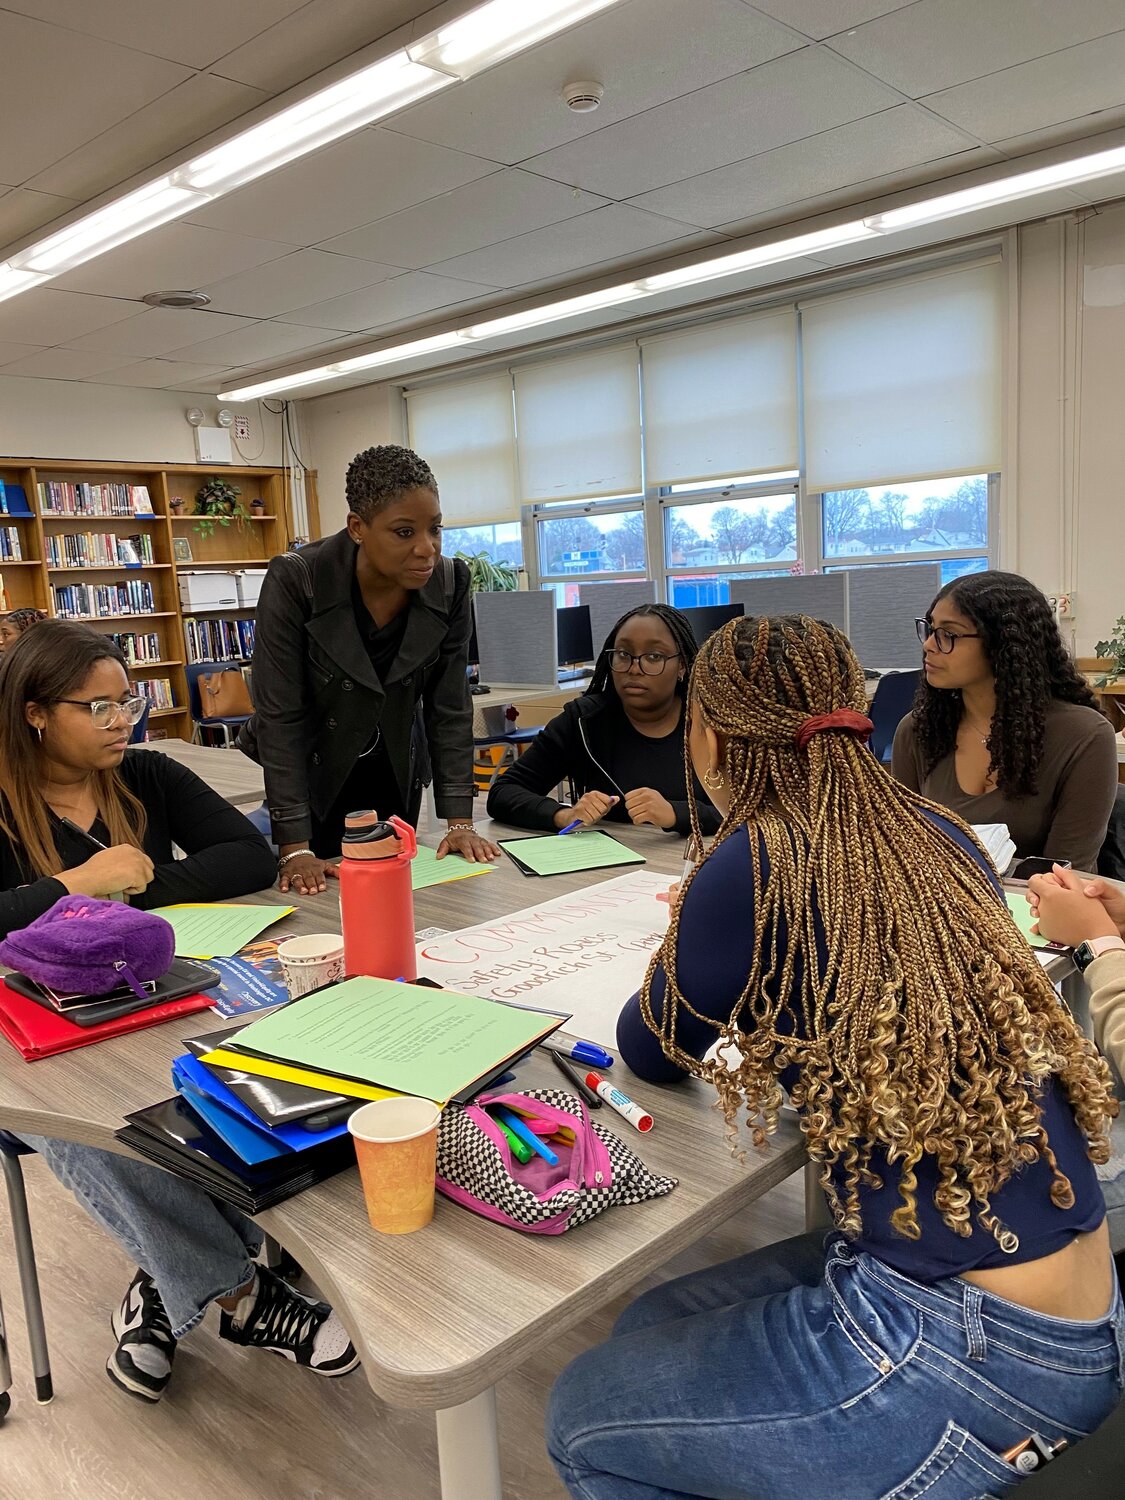 Nassau County Legislator, Siela Bynoe, helping students from both Uniondale and Malverne with their projects on creating policy that would improve their local communities.